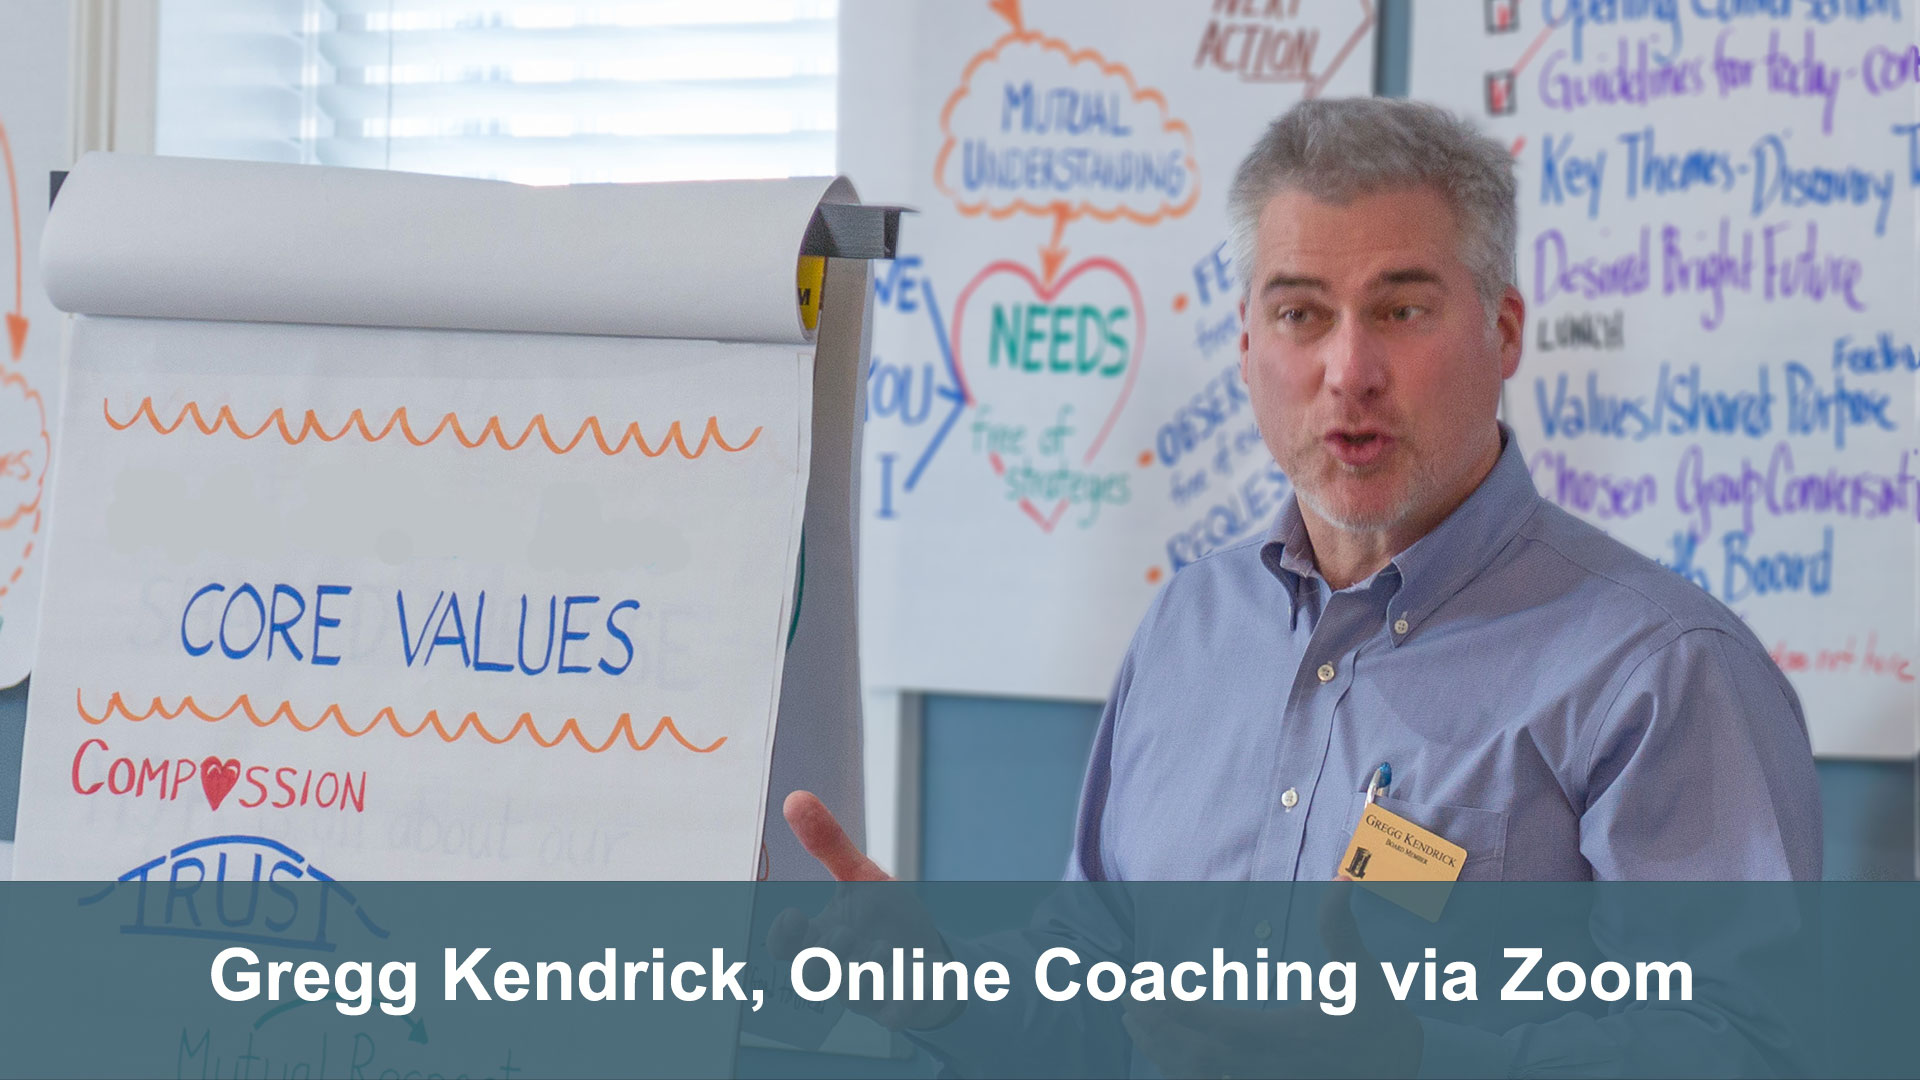 Using Zoom for training and coaching – Interview with Gregg Kendrick